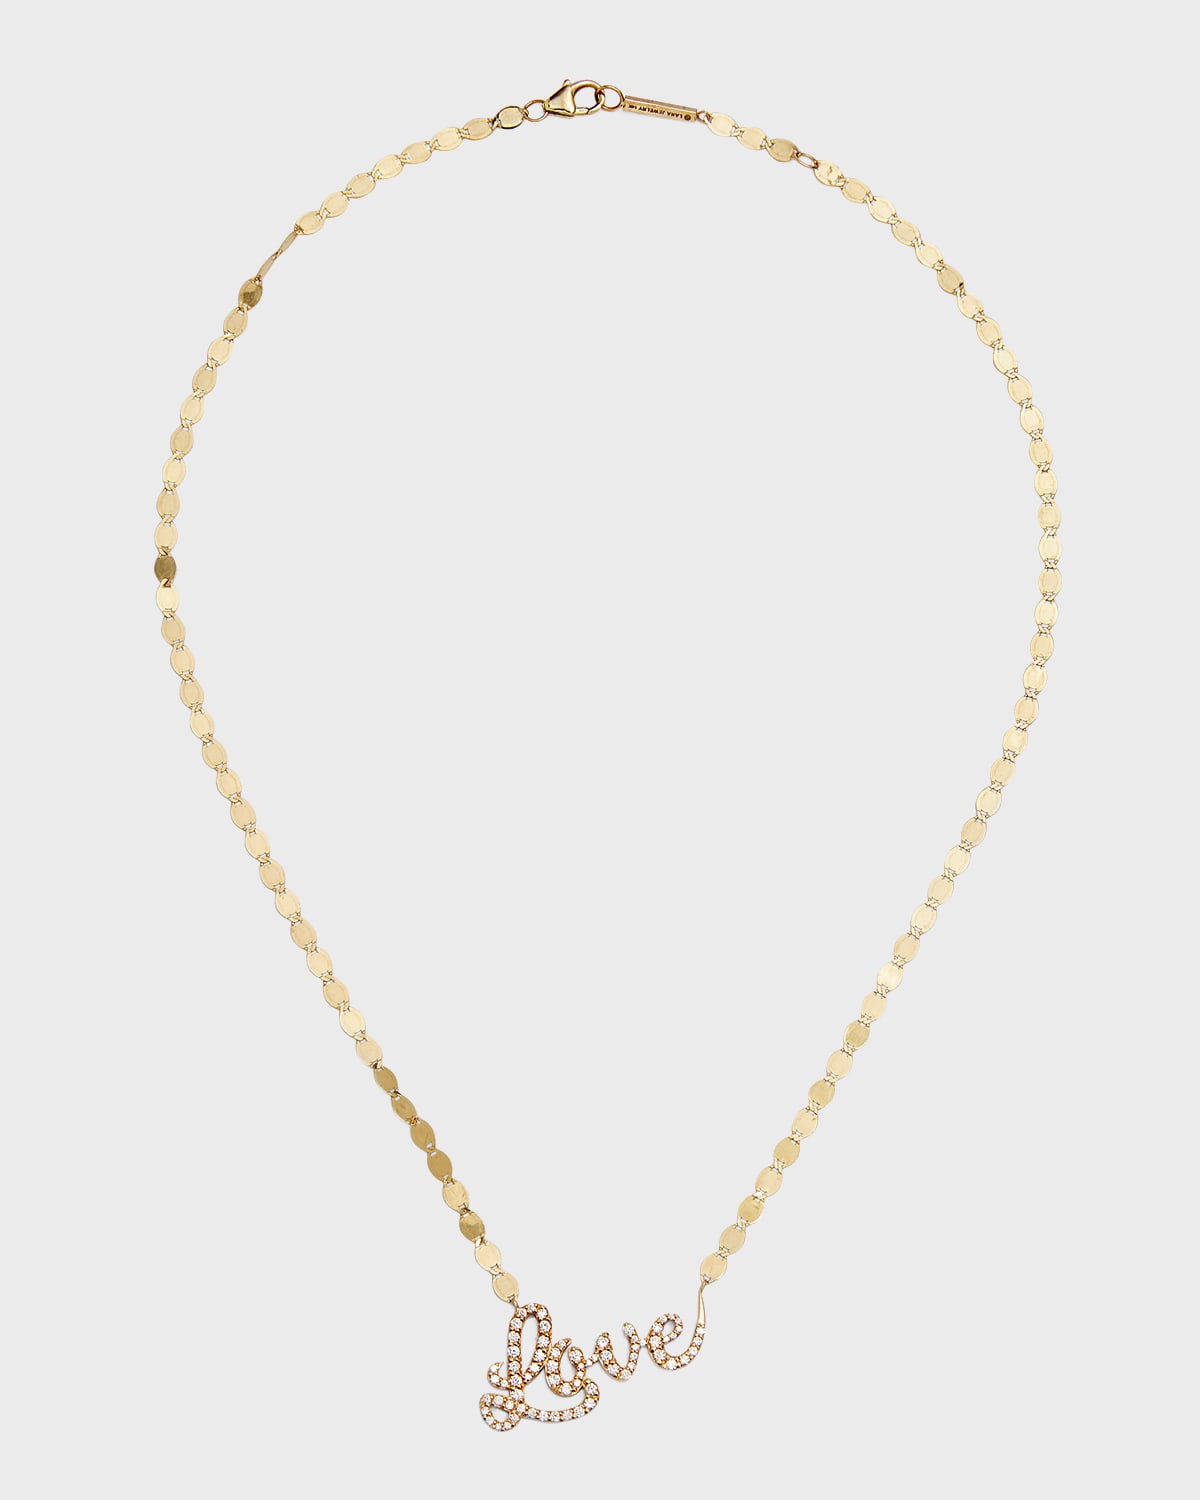 LANA Flawless Cursive "Love" on Chain Necklace